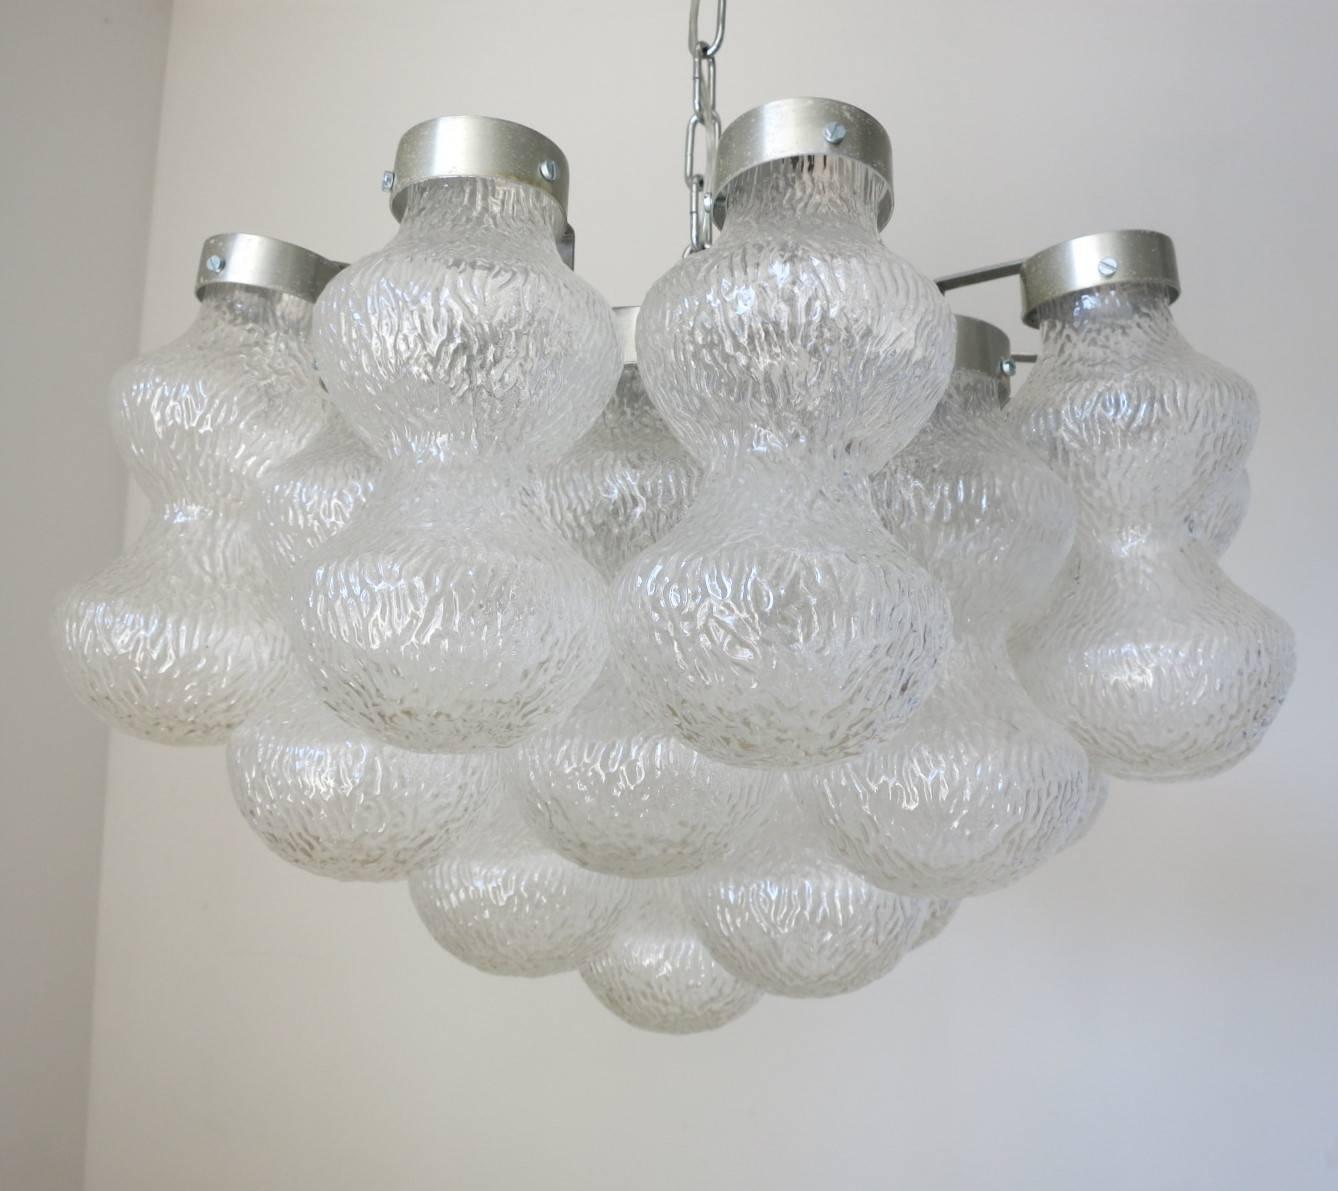 Barbell shaped clear Murano glass textured pieces hanging from nickel frame, designed by Antonio Pagan and made by Societa Veneziana di Conterie e Cristallerie, circa 1964.
3 lights / max 40W each
Diameter: 21 inches / Height: 14 inches
1 in stock